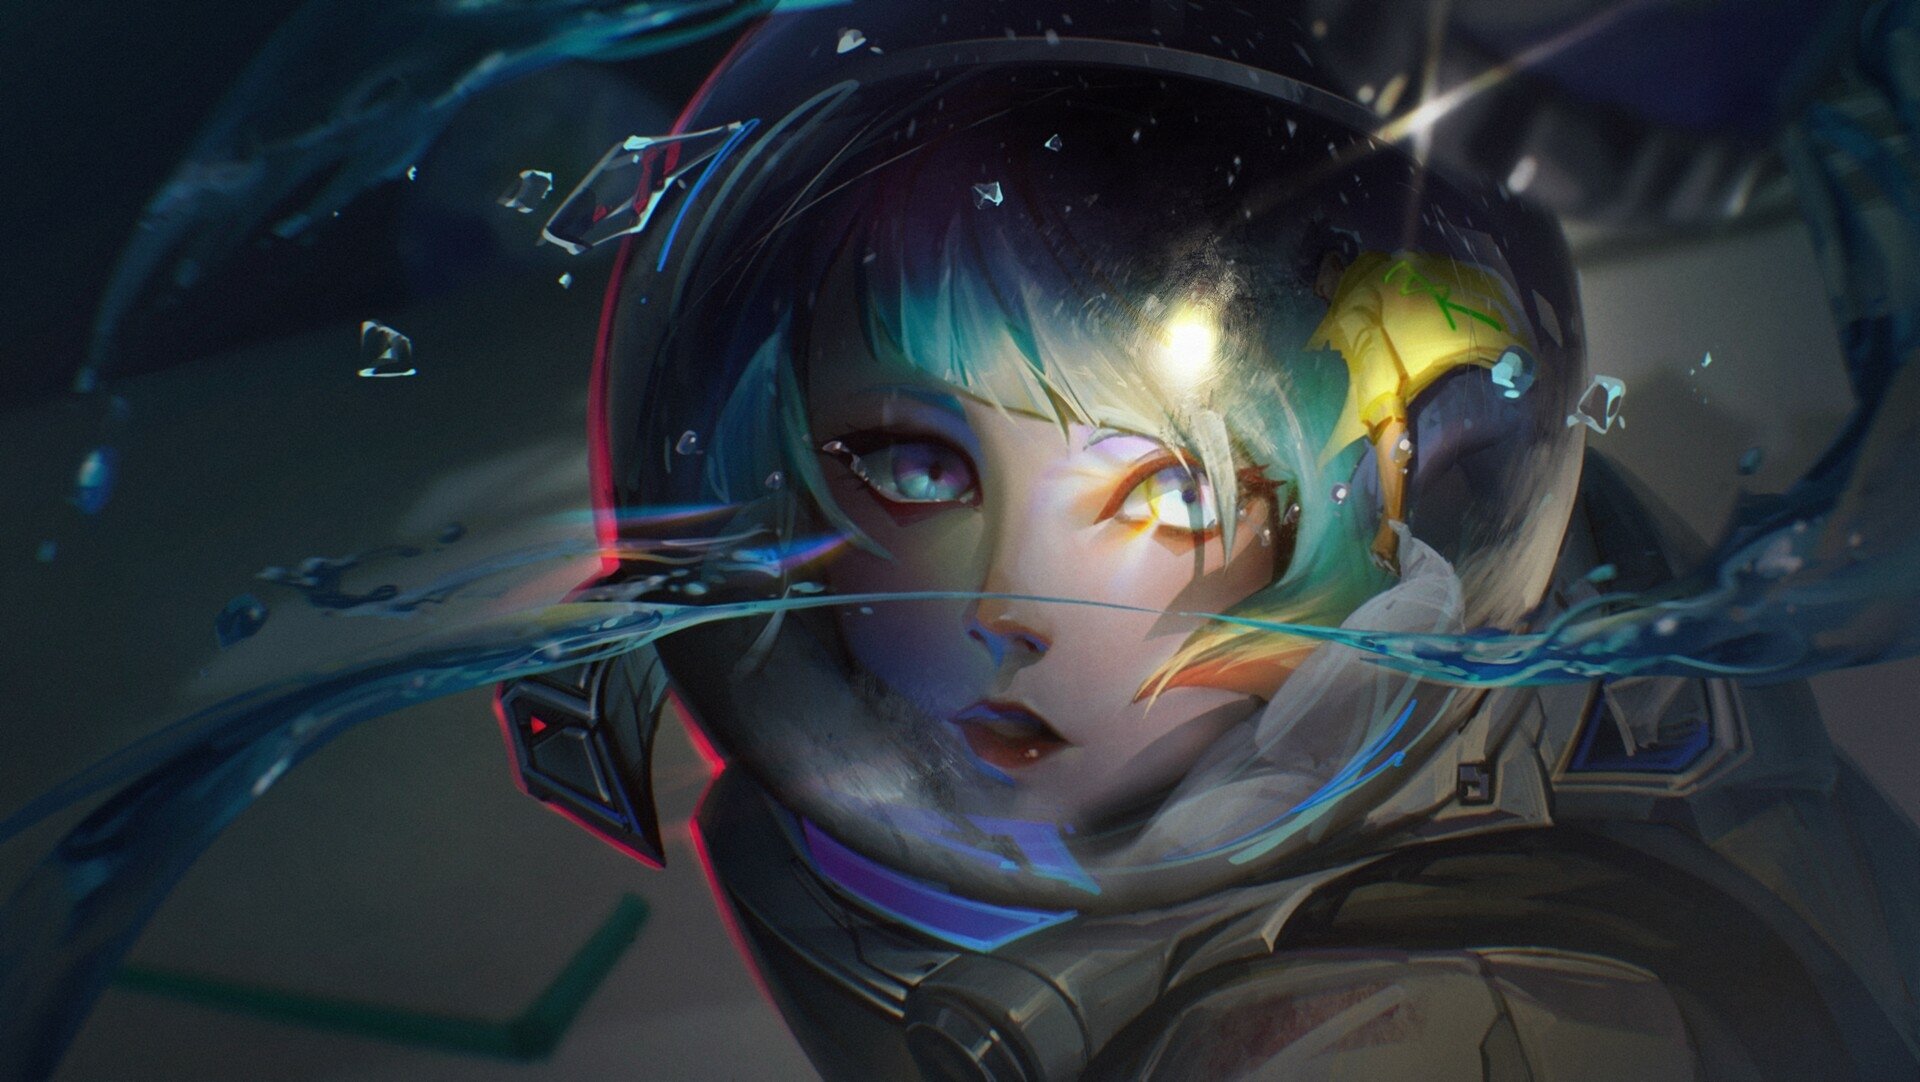 Anime Cyberpunk: Edgerunners HD Wallpaper by Shaoming Luo